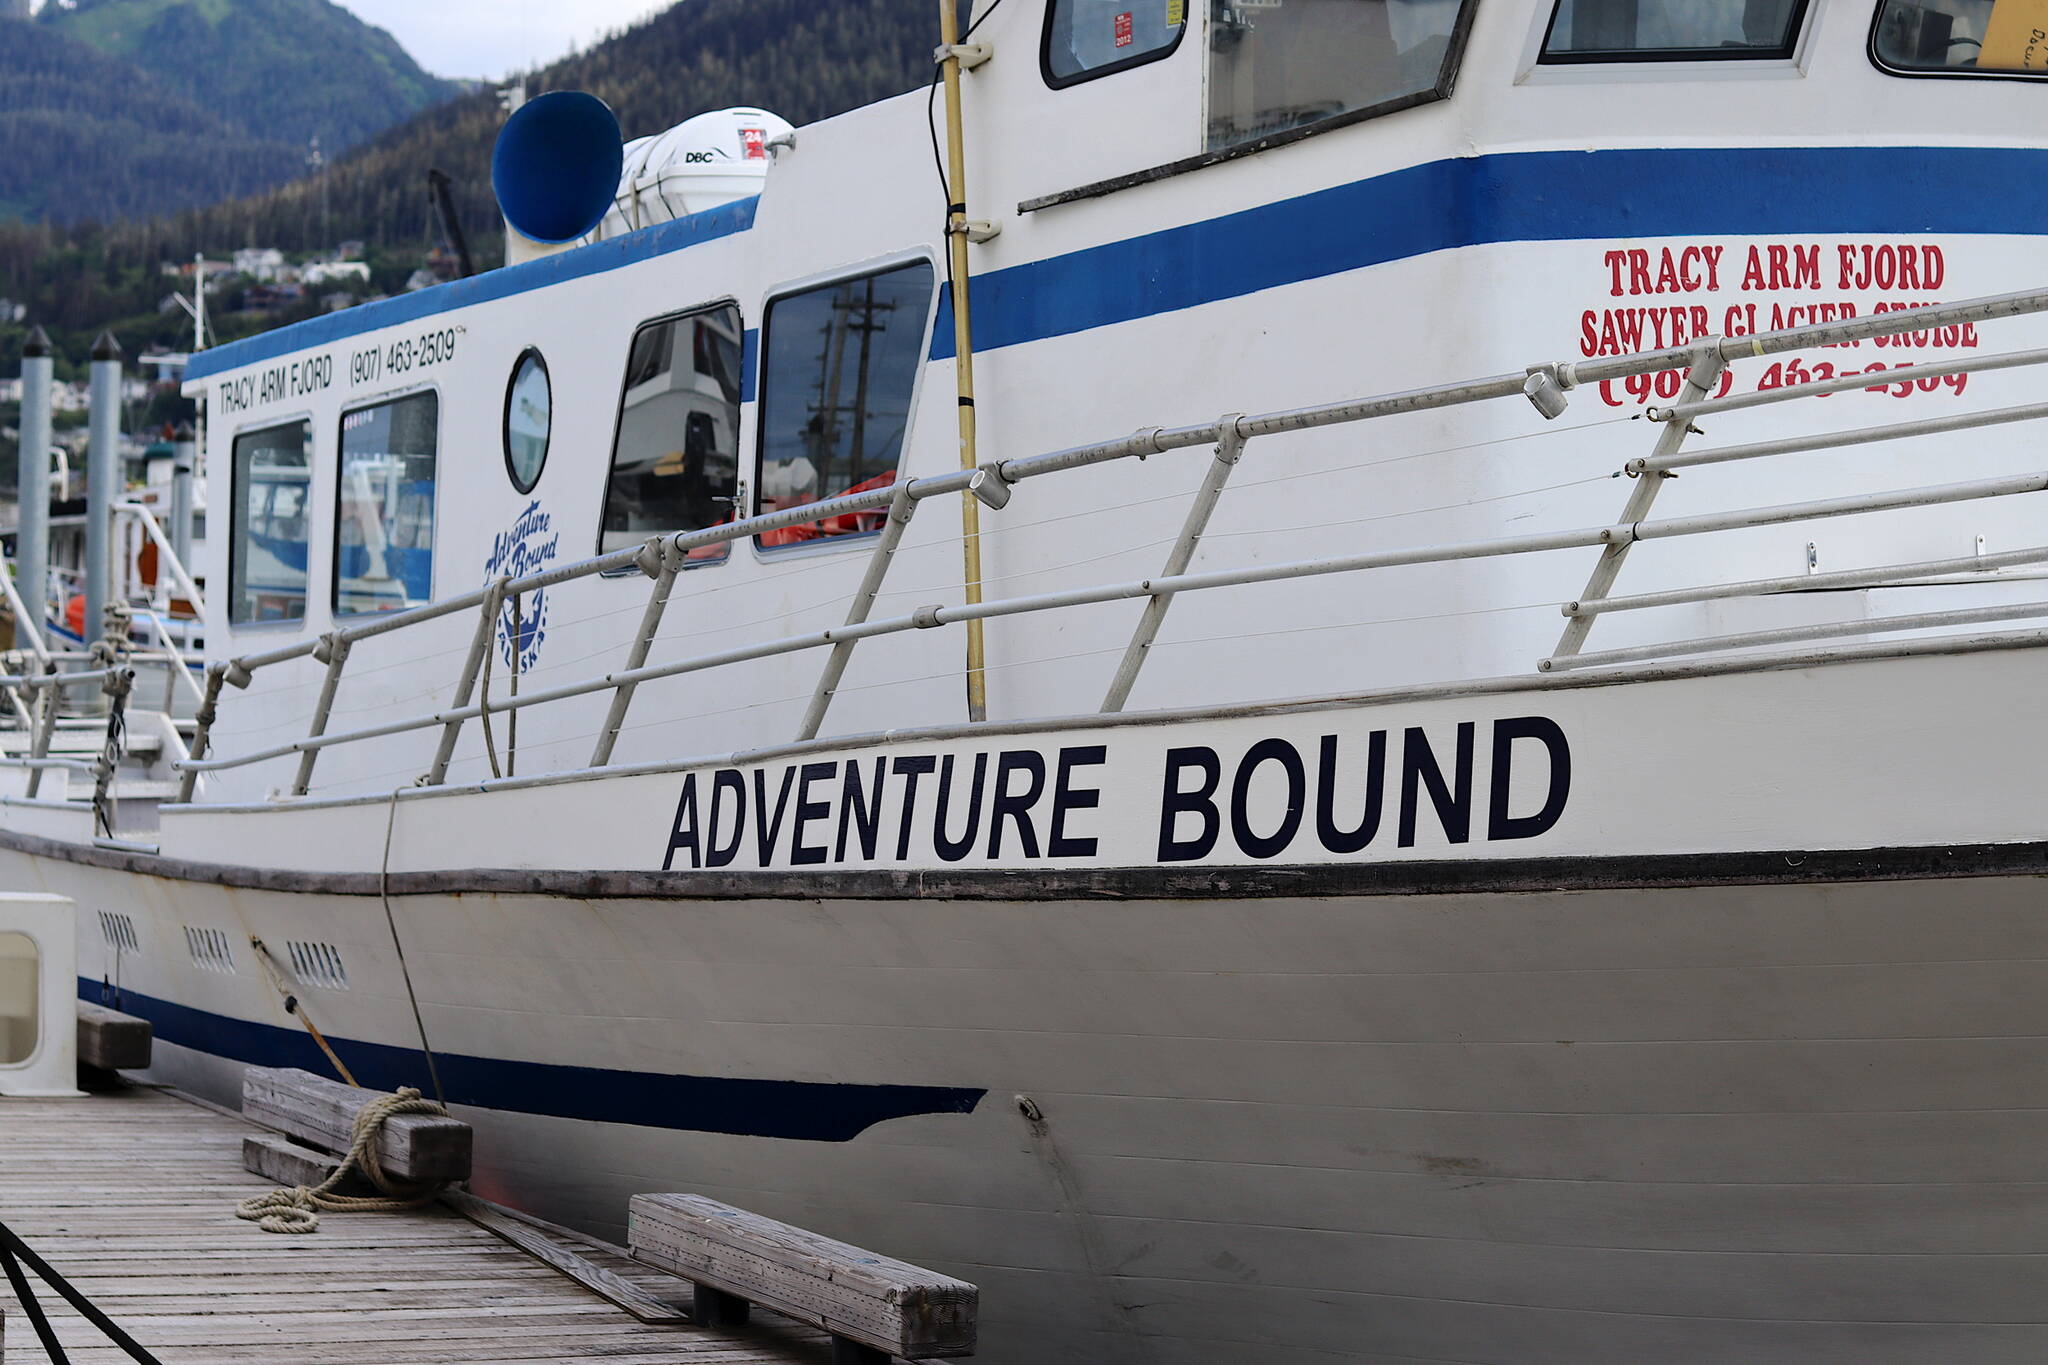 The Adventure Bound tour boat is seen here docked at Aurora Harbor during the past week. The vessel’s owner-operator was given four notices of deficiencies last year, but continued to operate, according to a U.S. Coast Guard report that also raises questions about the agency’s handling of a grounding incident involving the company. (Meredith Jordan / Juneau Empire)